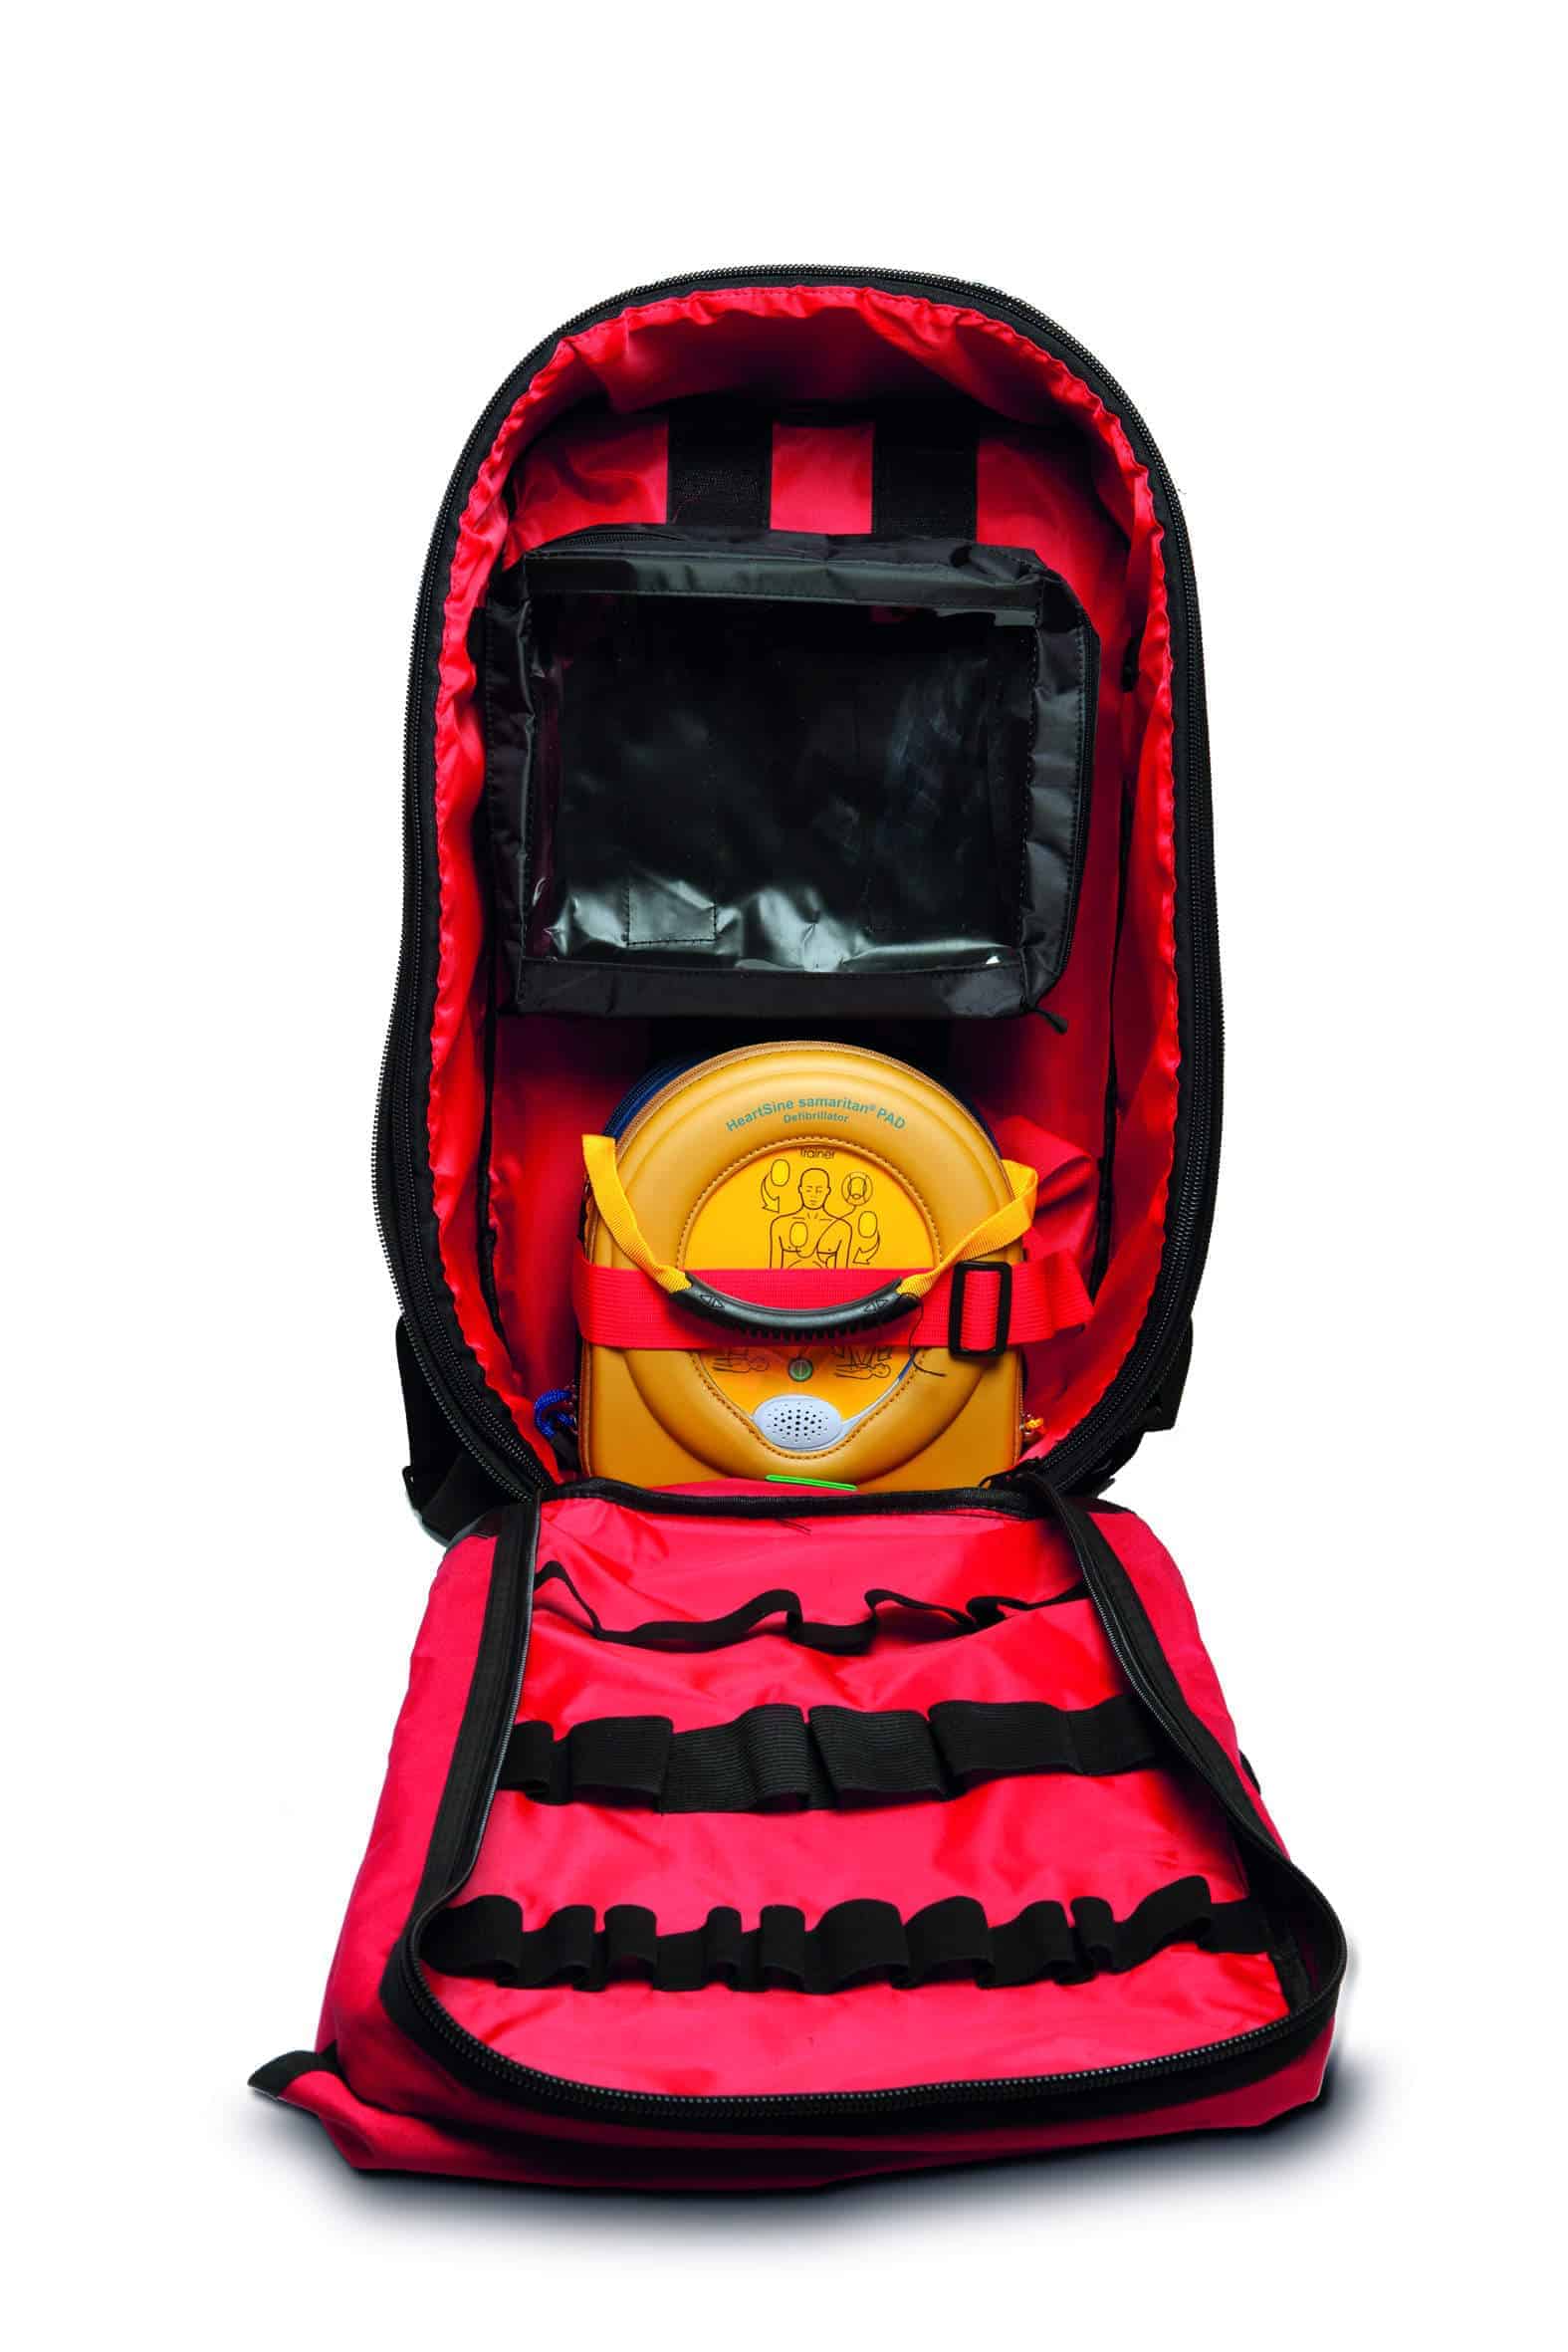 Large AED Backpack for any AED - AED Backpack Compact Open